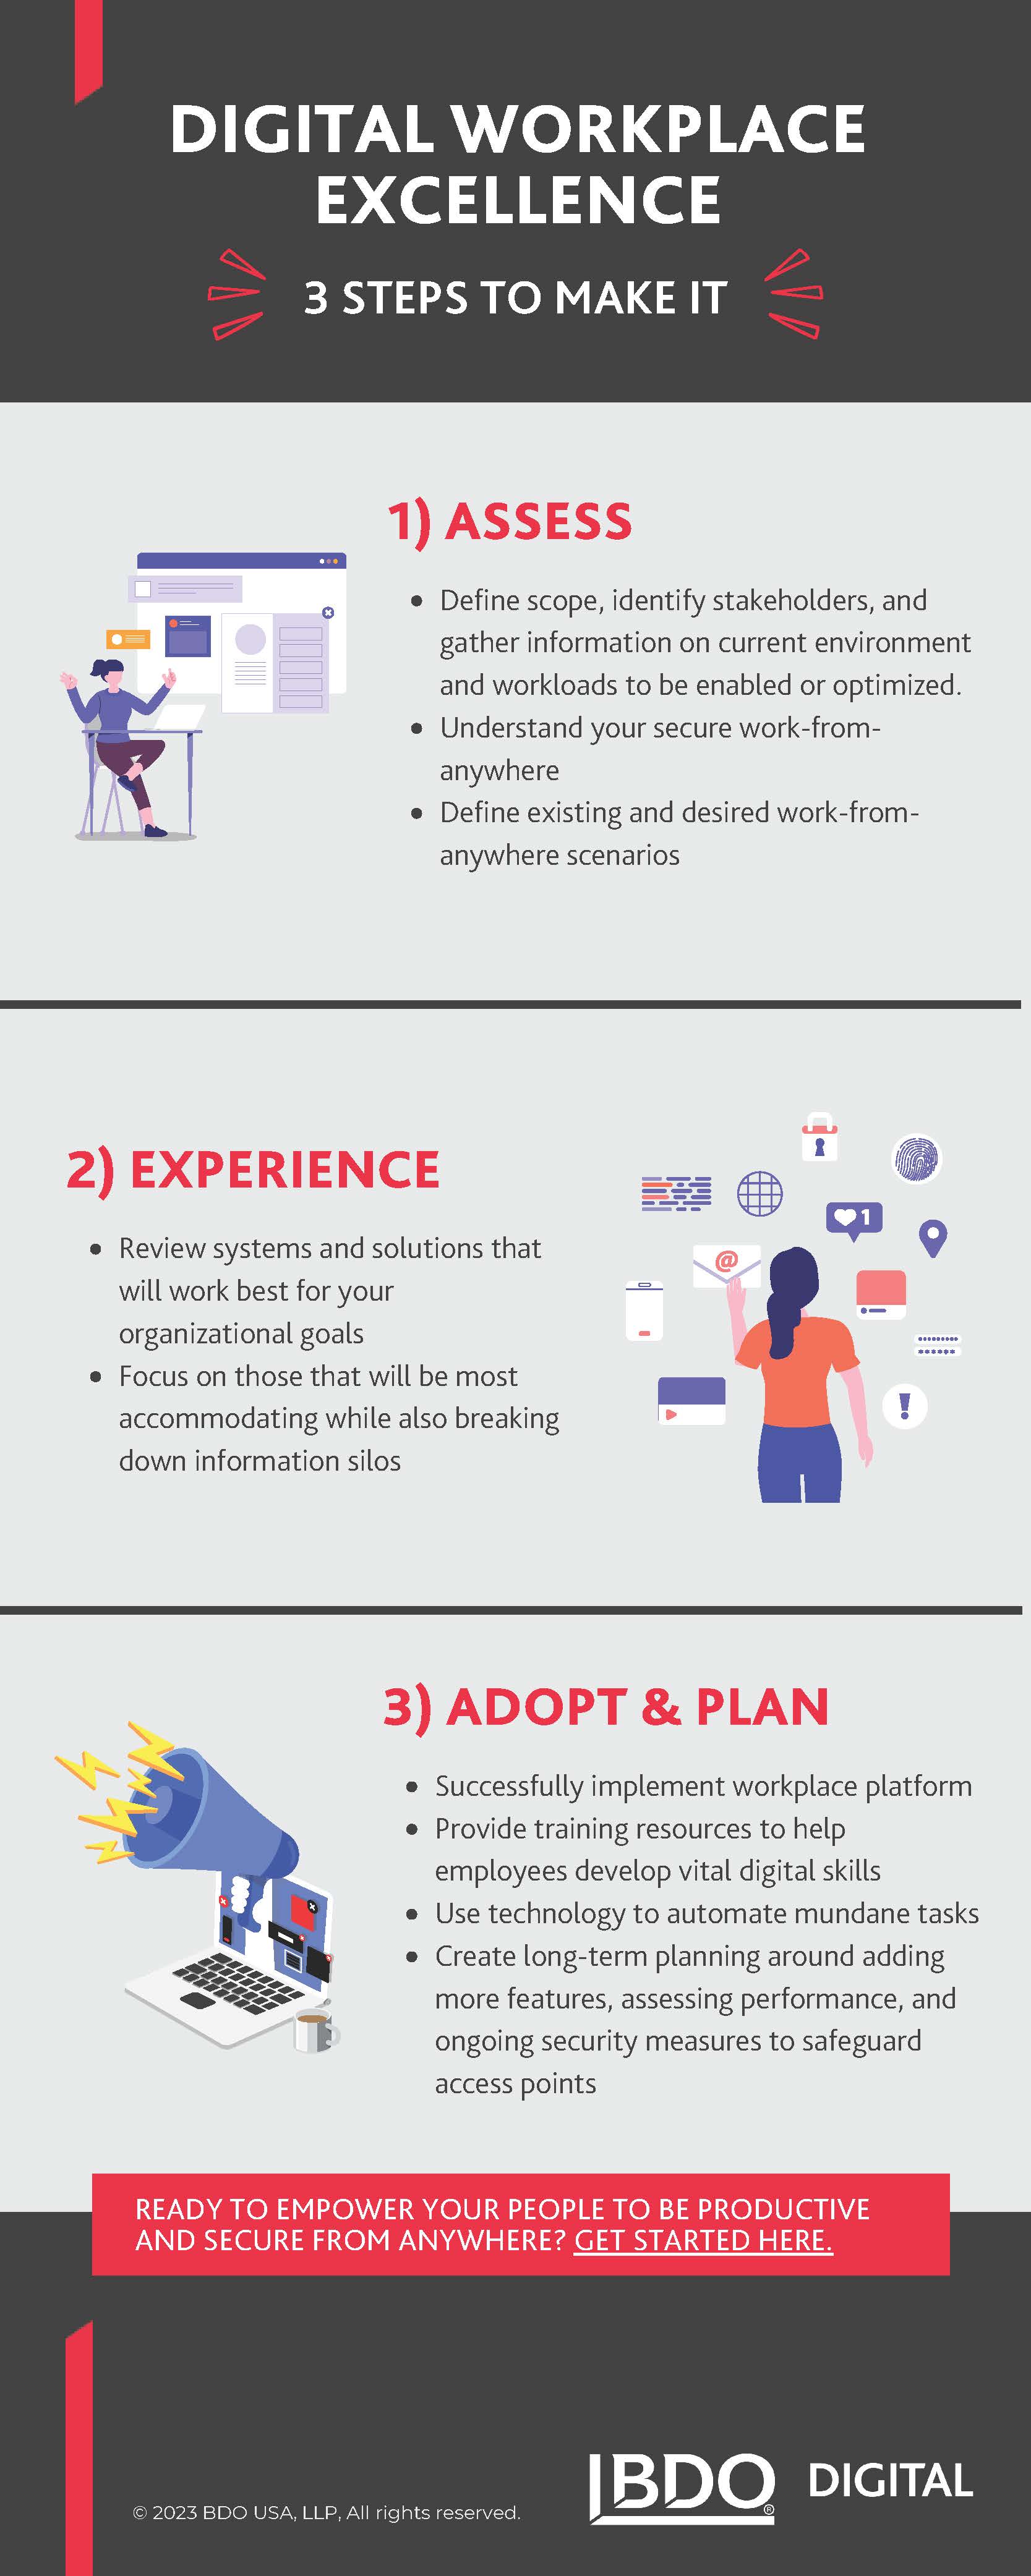 This infographic outlines three simple steps to effectively implement a Digital Workplace strategy capable of driving growth and cultural change.